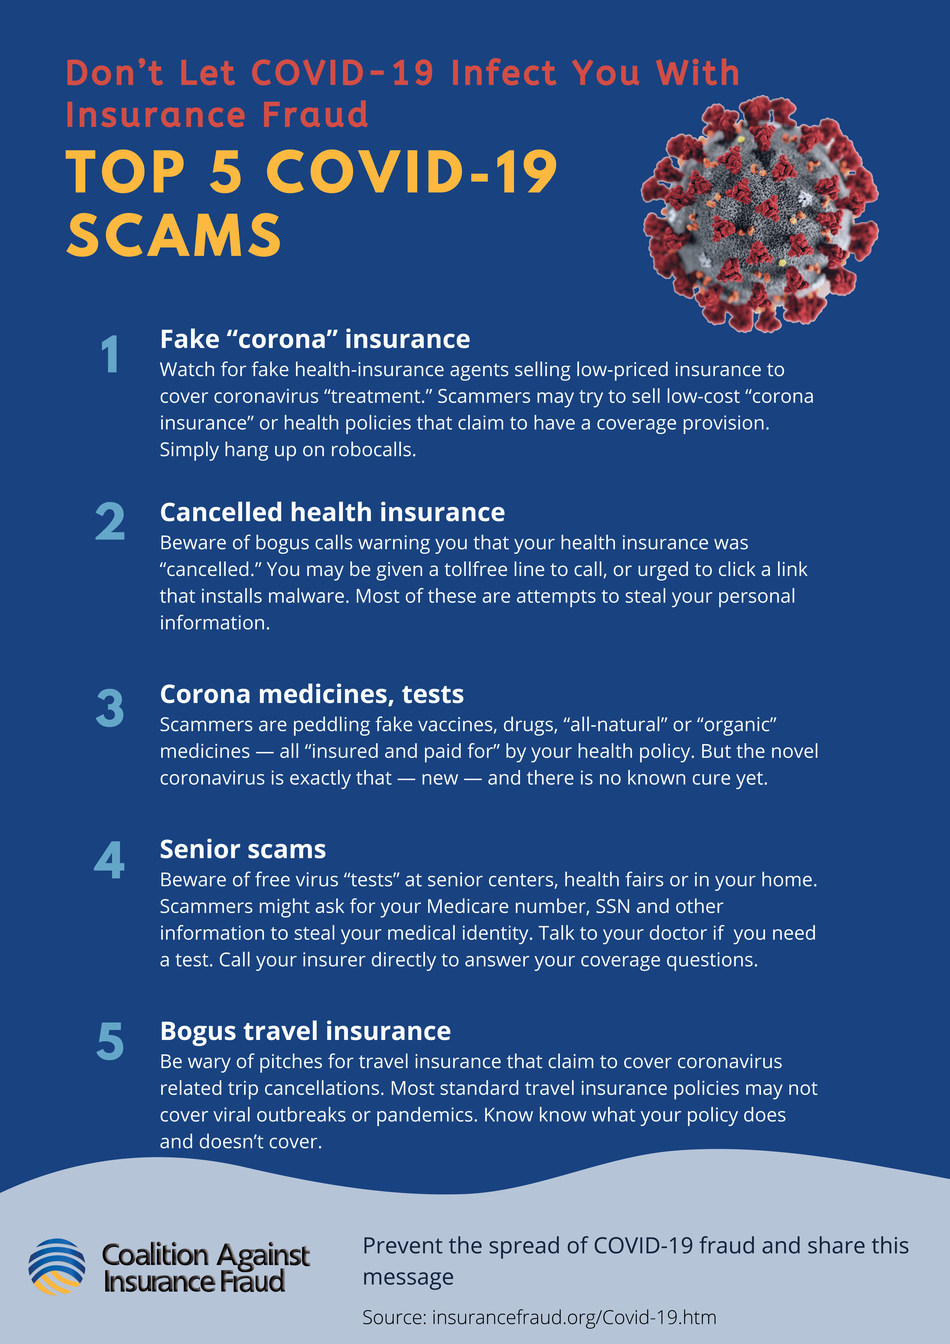 Some Insurance Scams